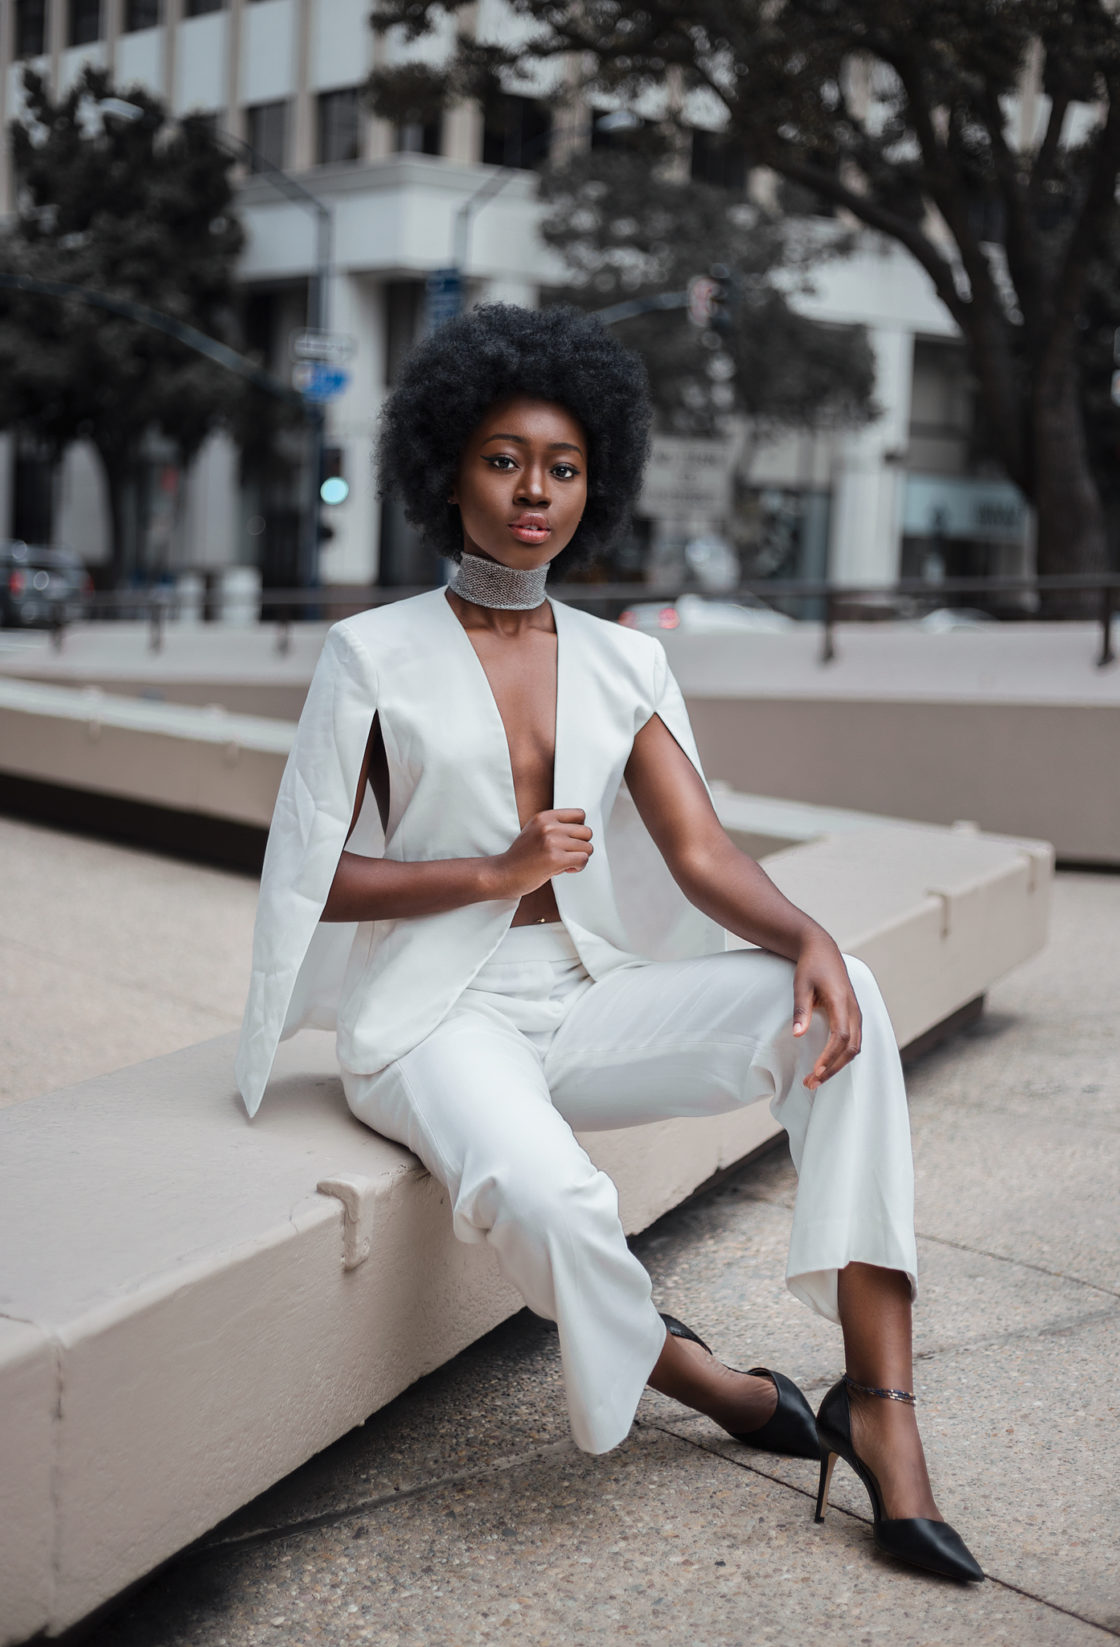 Fashion Bombshell of the Day: Akua from Philly – Fashion Bomb Daily